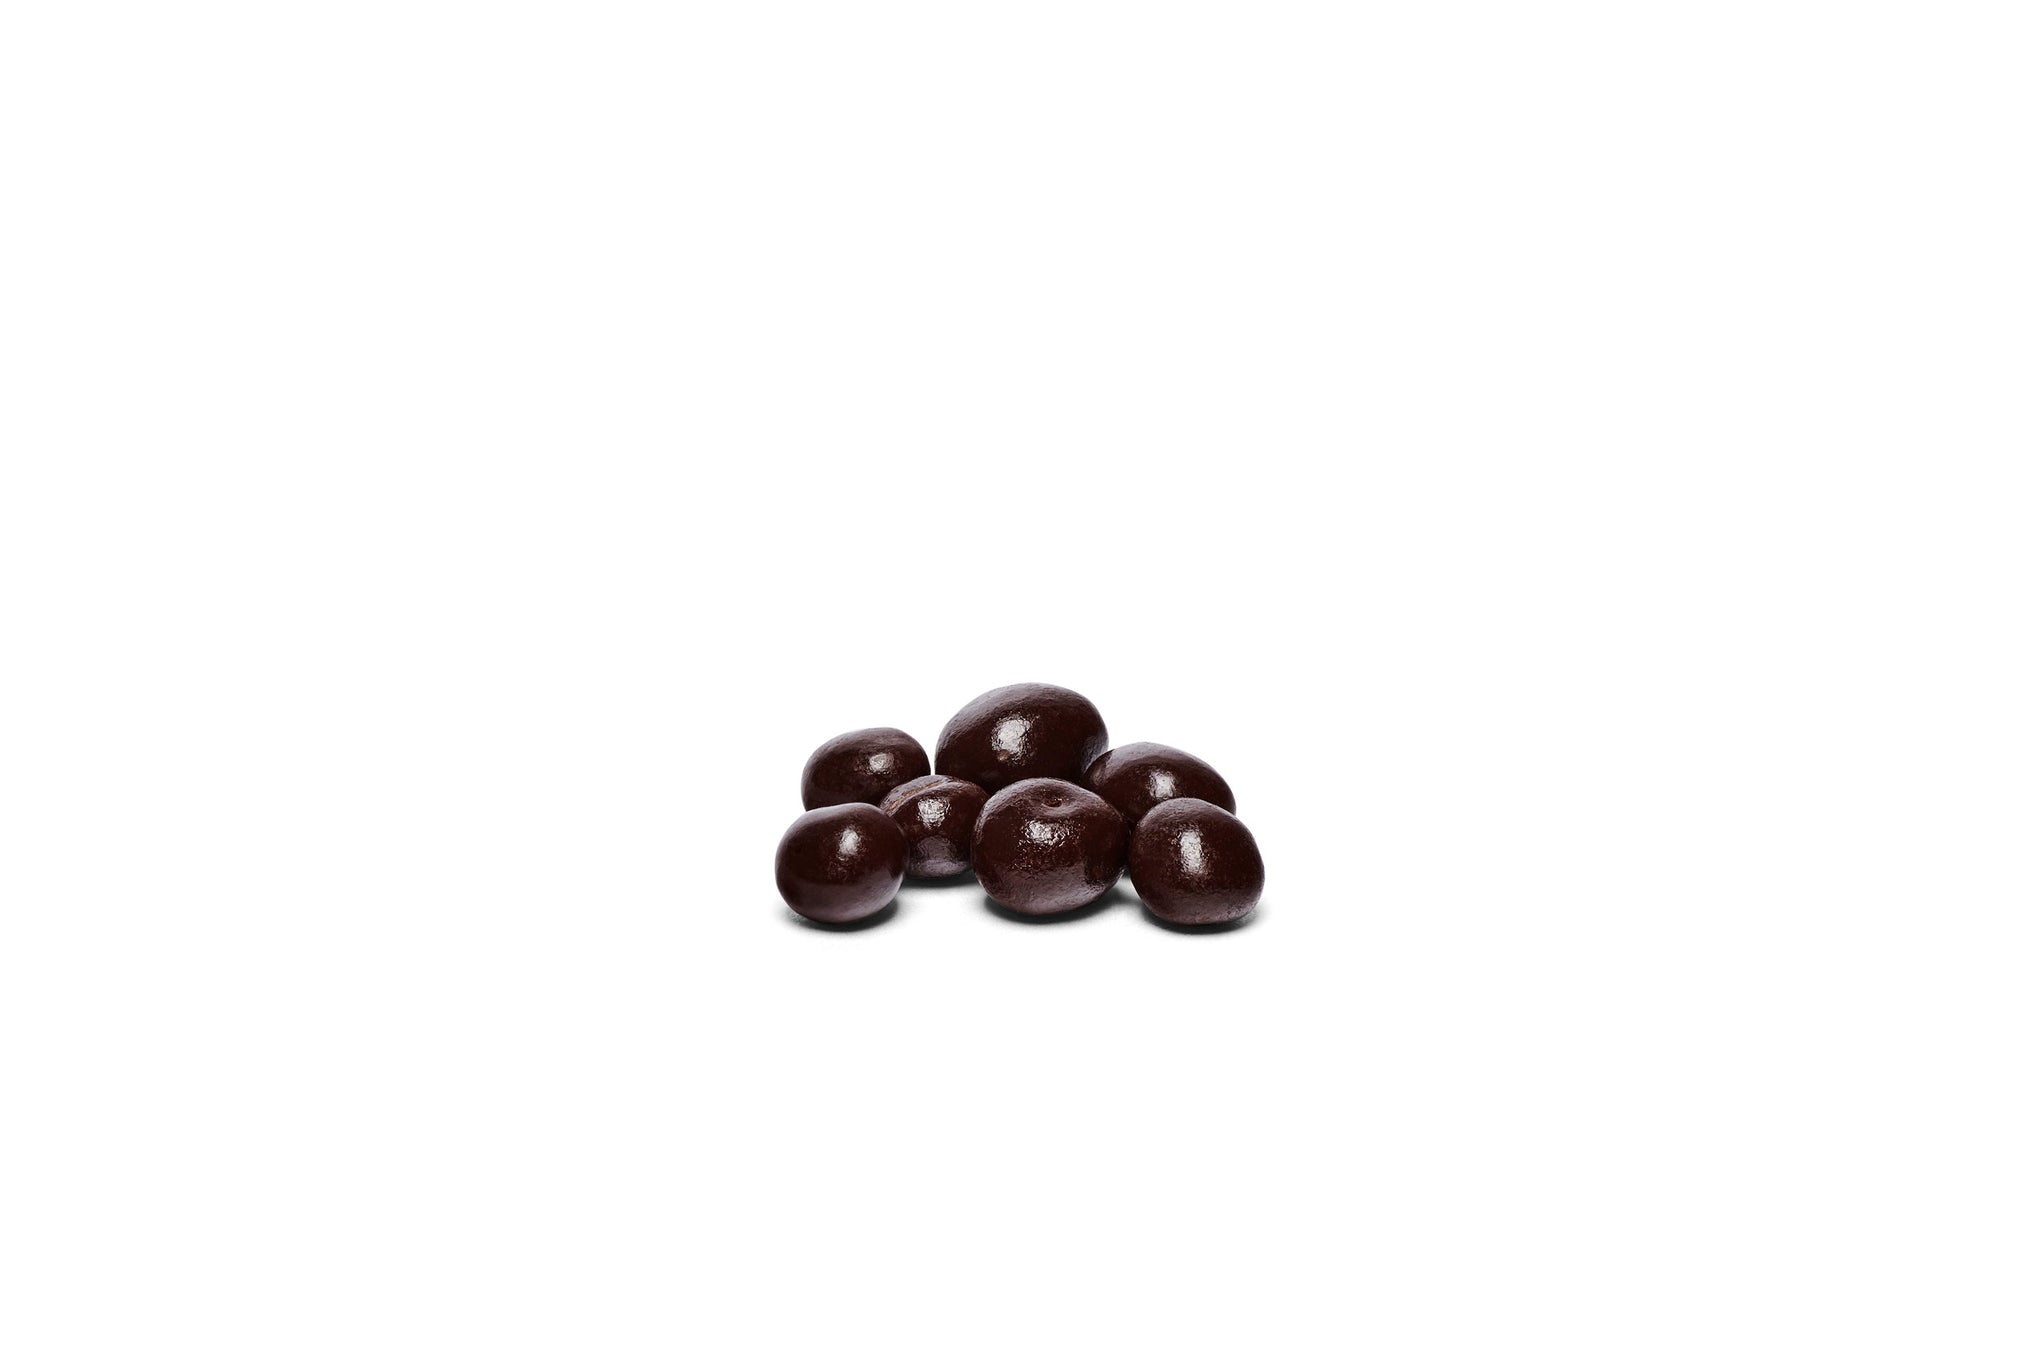 Chocolate beans scattered